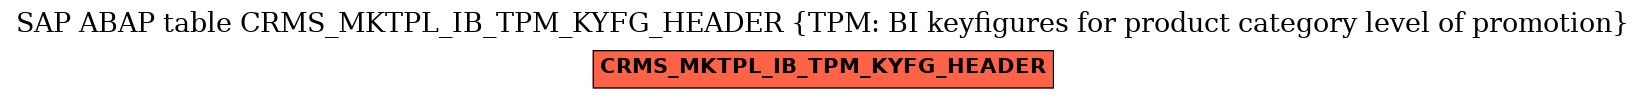 E-R Diagram for table CRMS_MKTPL_IB_TPM_KYFG_HEADER (TPM: BI keyfigures for product category level of promotion)